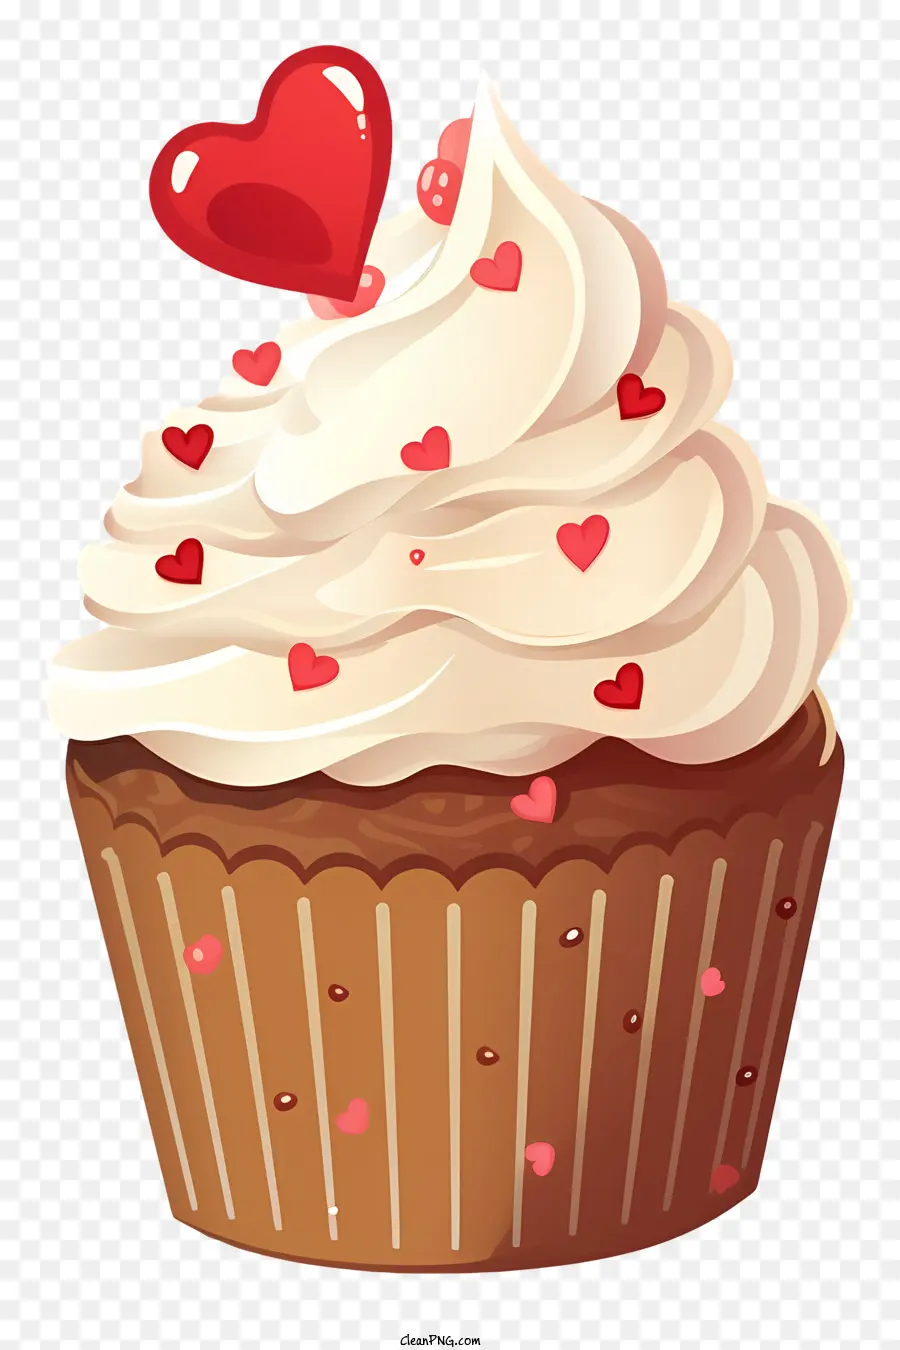 cupcake chocolate cupcake creamy frosting red heart red heart shaped sprinkles